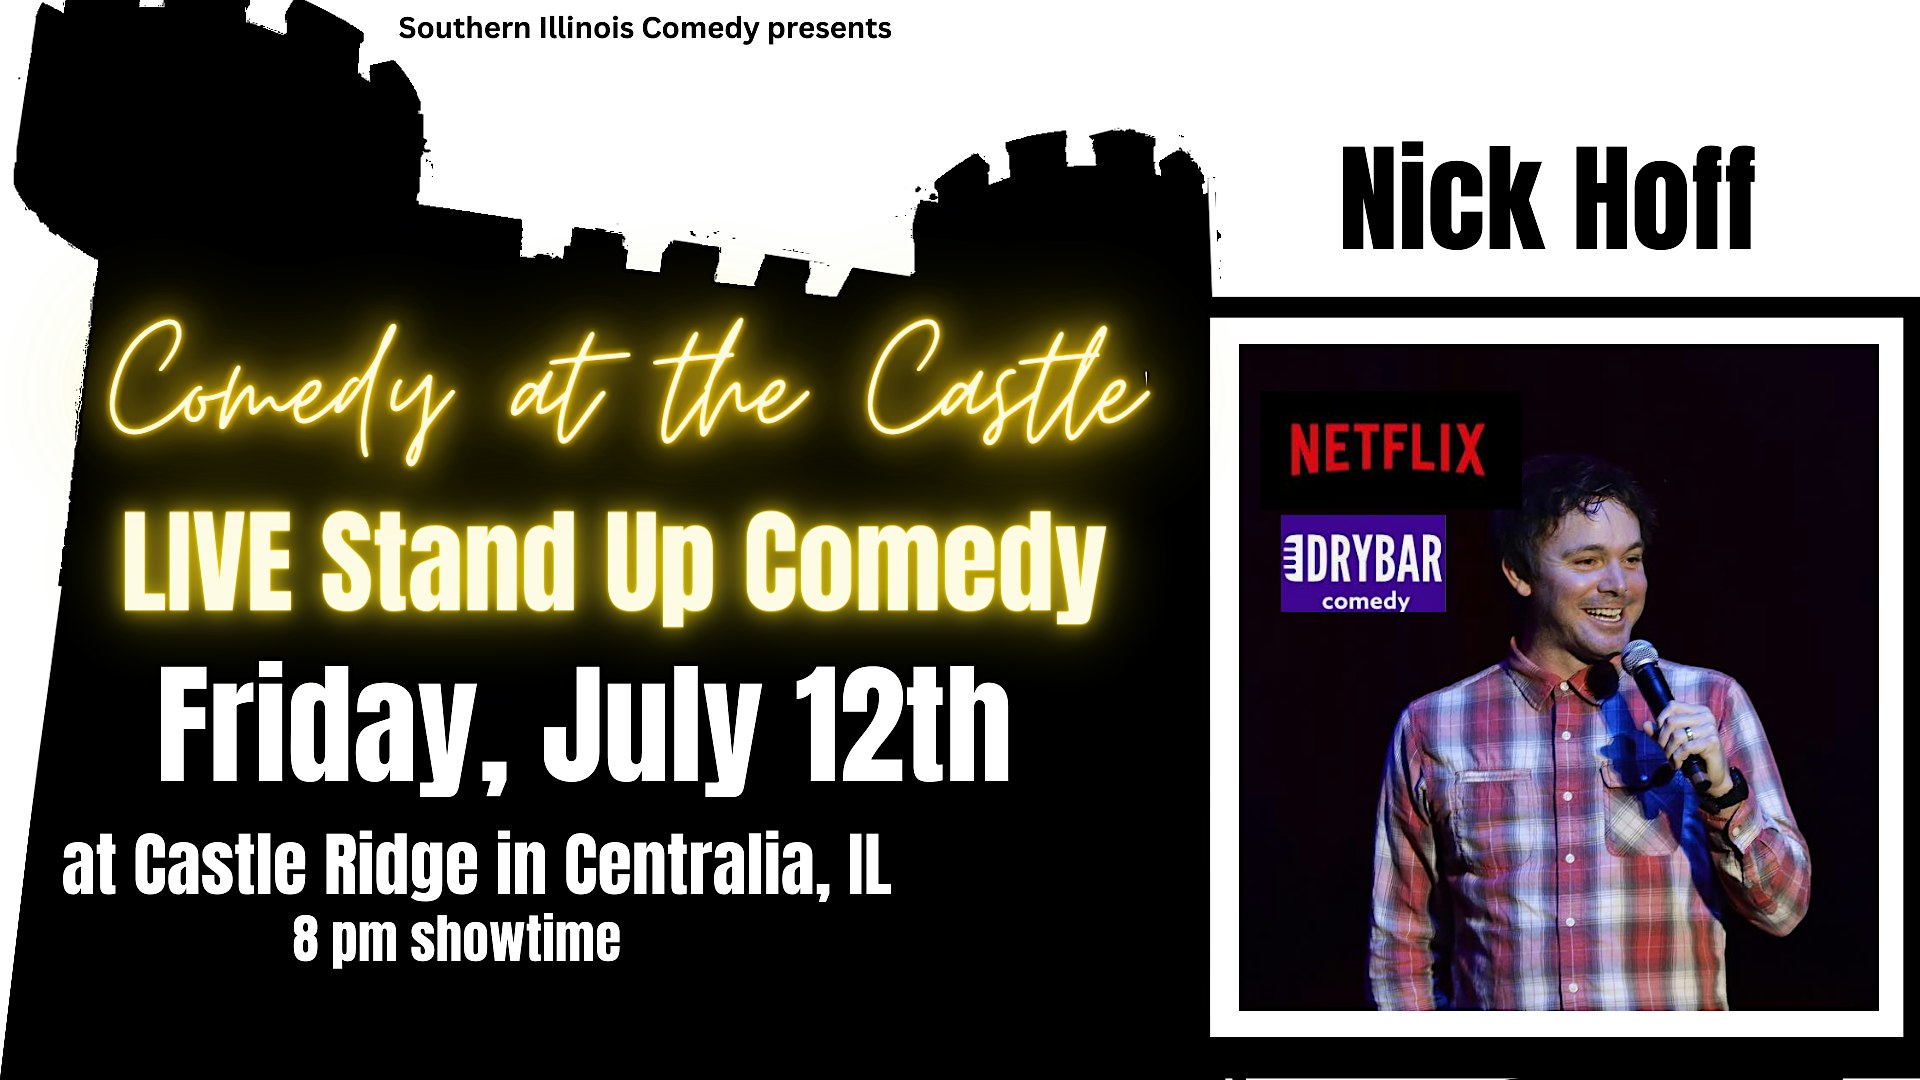 Comedy at the Castle - LIVE Stand Up Comedy with Nick Hoff